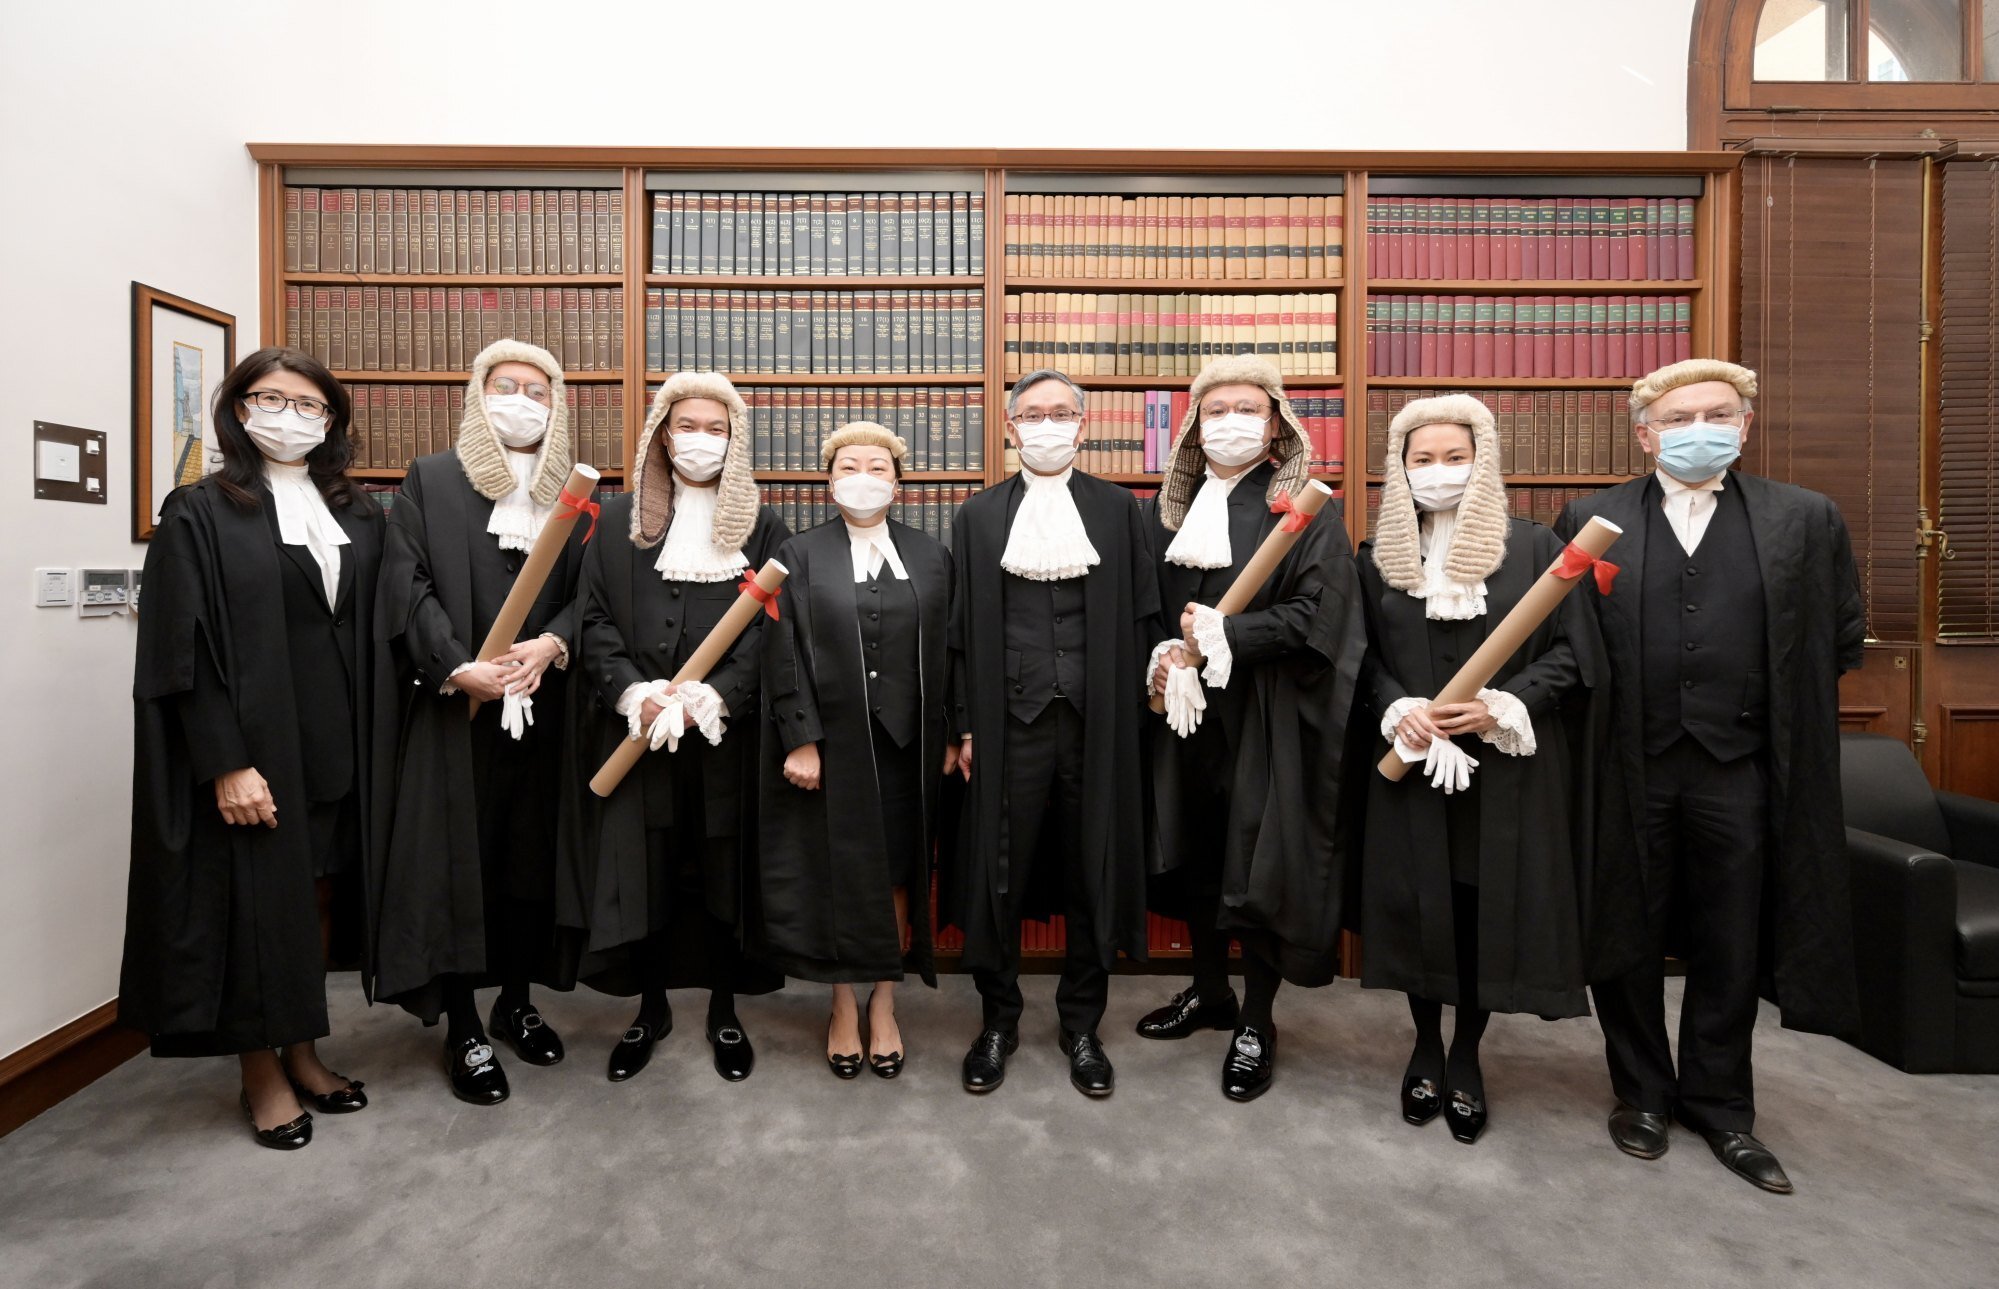 The ceremonial proceedings for the admission of the newly appointed Senior Counsel took place at the Court of Final Appeal today (May 29). Photo shows the Chief Justice of the Court of Final Appeal, Mr Andrew Cheung Kui-nung (fourth right); the Secretary for Justice, Ms Teresa Cheng, SC (fourth left); the Chairman of the Hong Kong Bar Association, Mr Paul Harris, SC (first right); and the President of the Law Society of Hong Kong, Ms Melissa Pang (first left), with the newly appointed Senior Counsel Mr Philip Chau Ka-chun (third left), Mr Law Man-chung (third right), Mr Norman Nip Sum-ping (second left) and Ms Vinci Lam Wing-sai (second right).